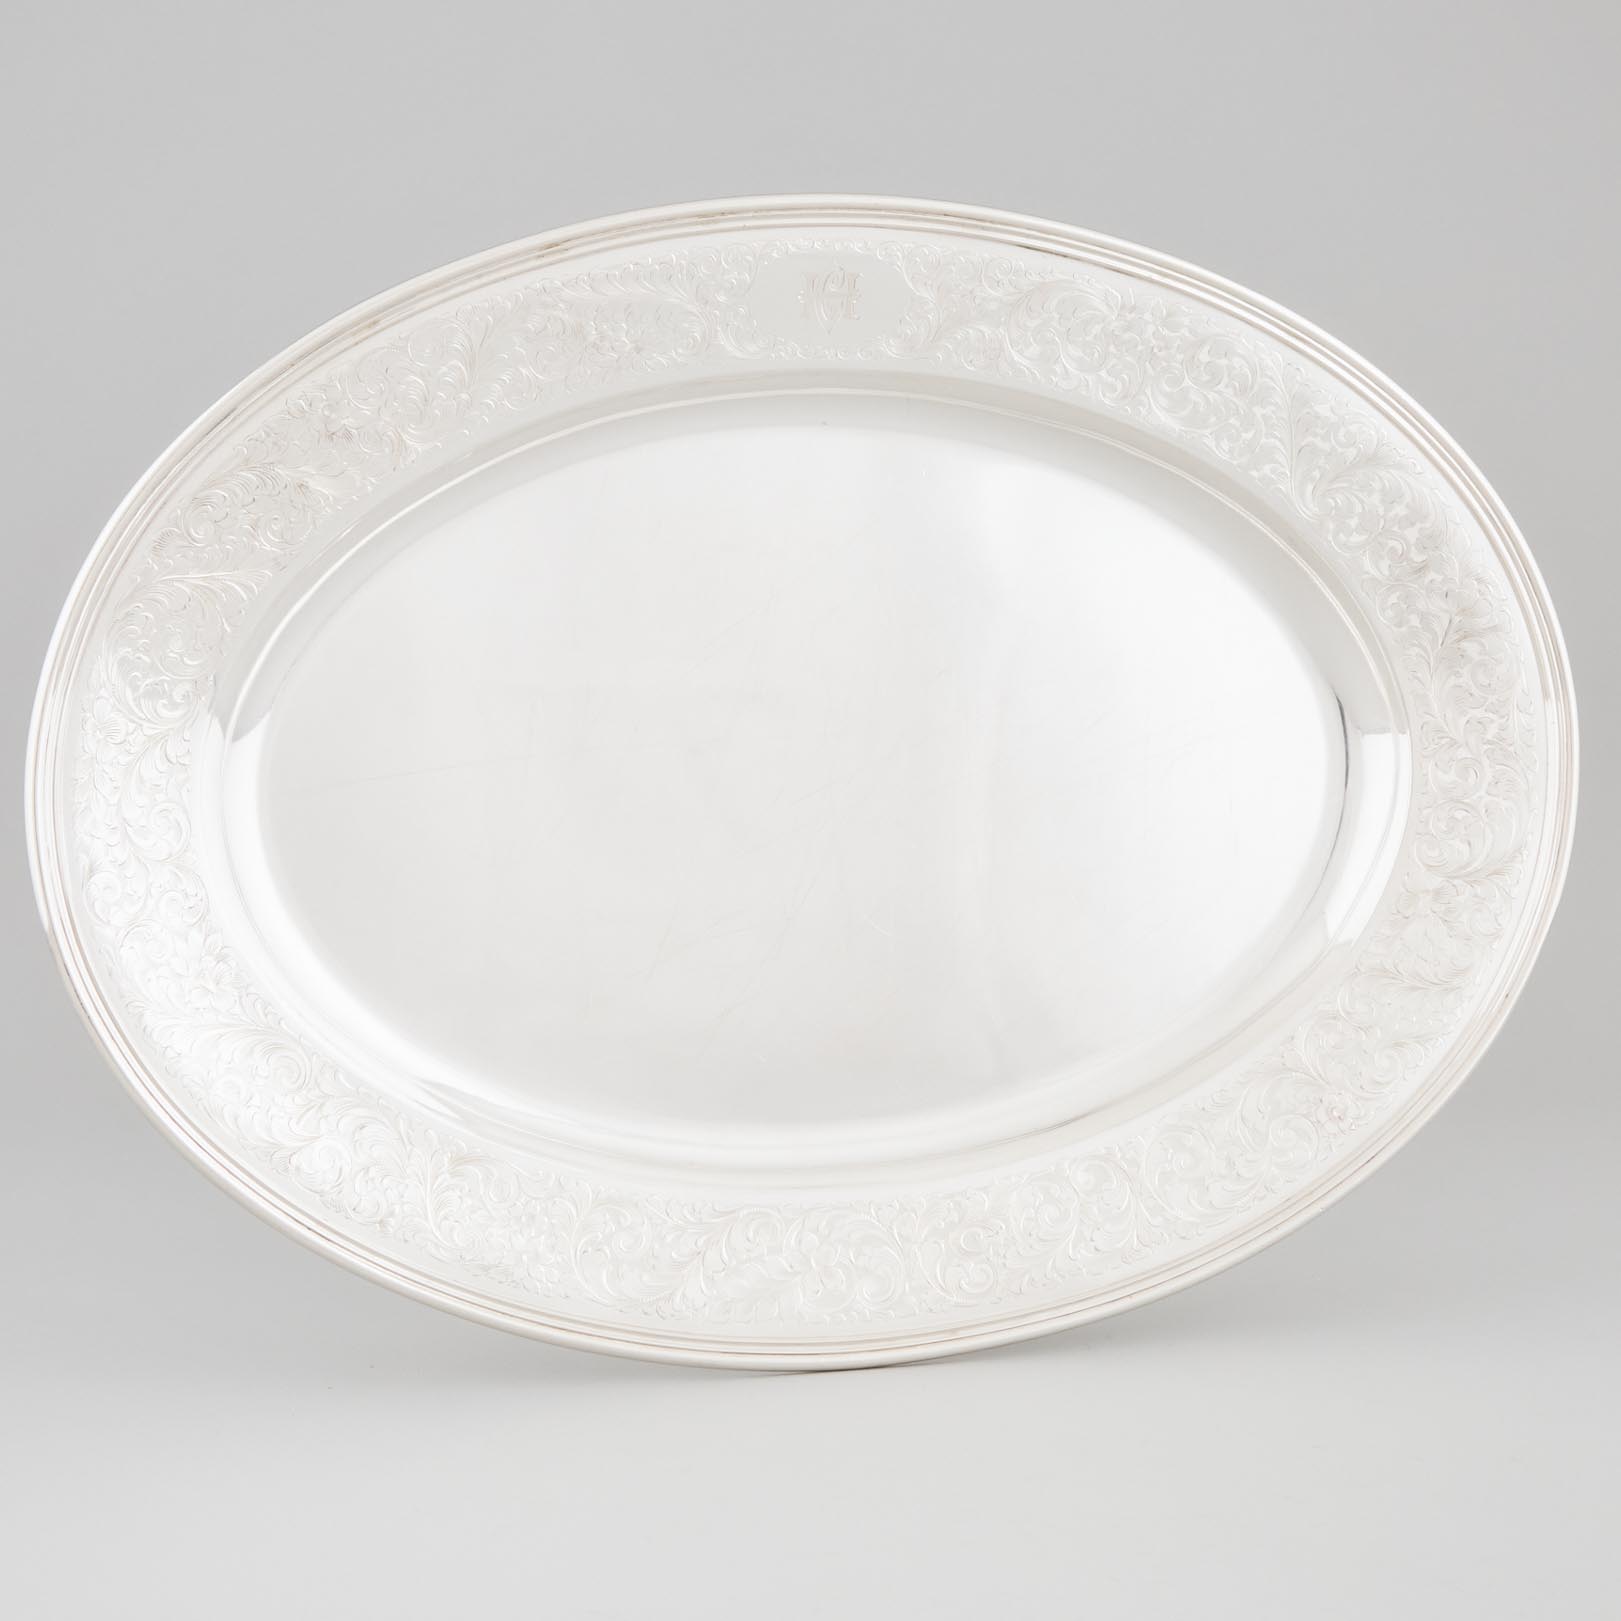 Canadian Silver Oval Platter, Henry Birks & Sons, Montreal, Que., 1939